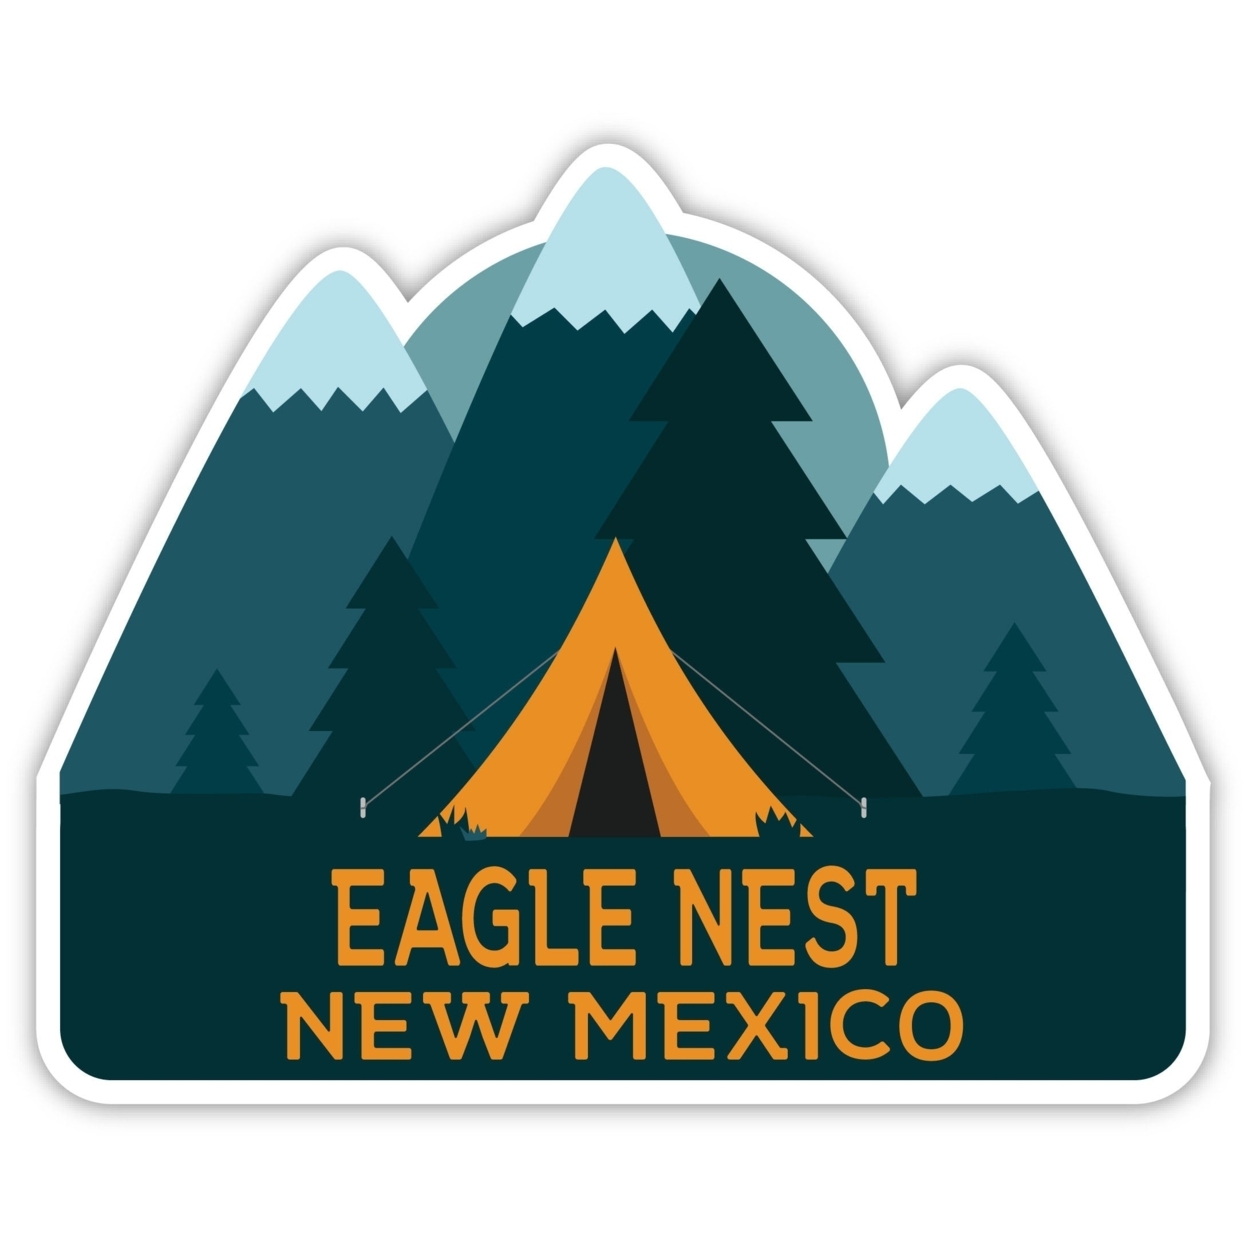 Eagle Nest New Mexico Souvenir Decorative Stickers (Choose Theme And Size) - 4-Pack, 8-Inch, Tent